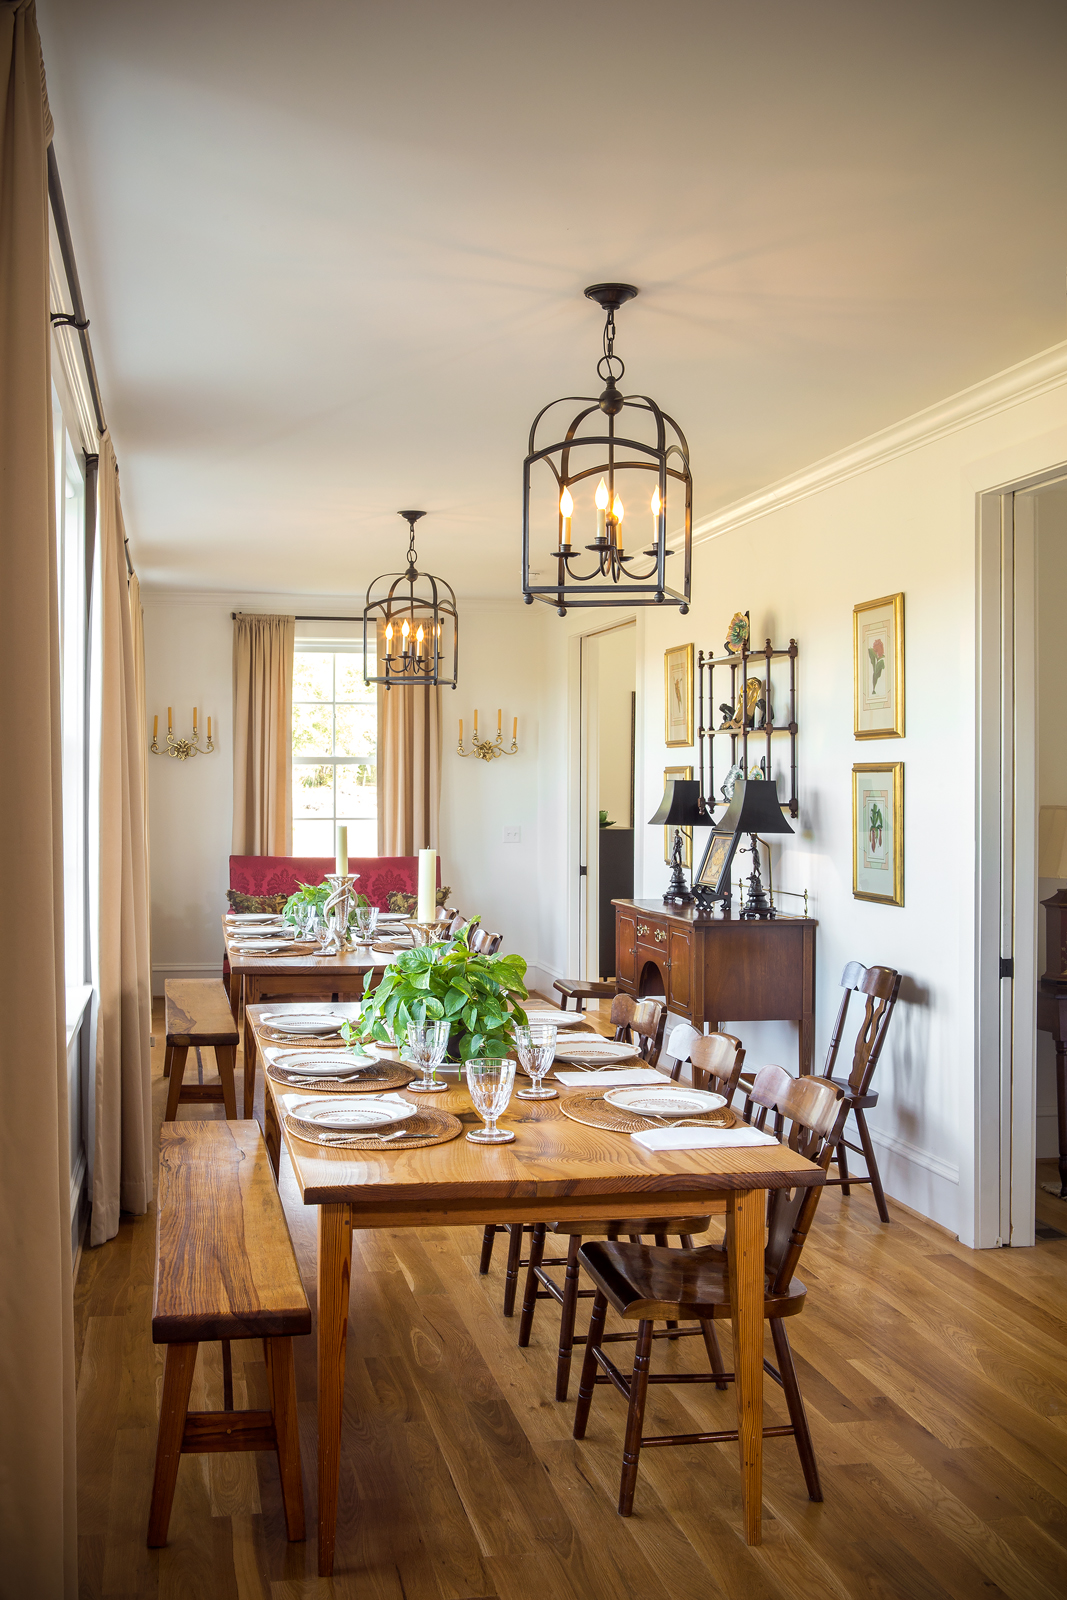 The dining room extends 32 feet by 10 feet, which is one half the length of the house. The gracious room reflects the grand hall of old European homes and is large enough to hold two 8-foot-long tables.
